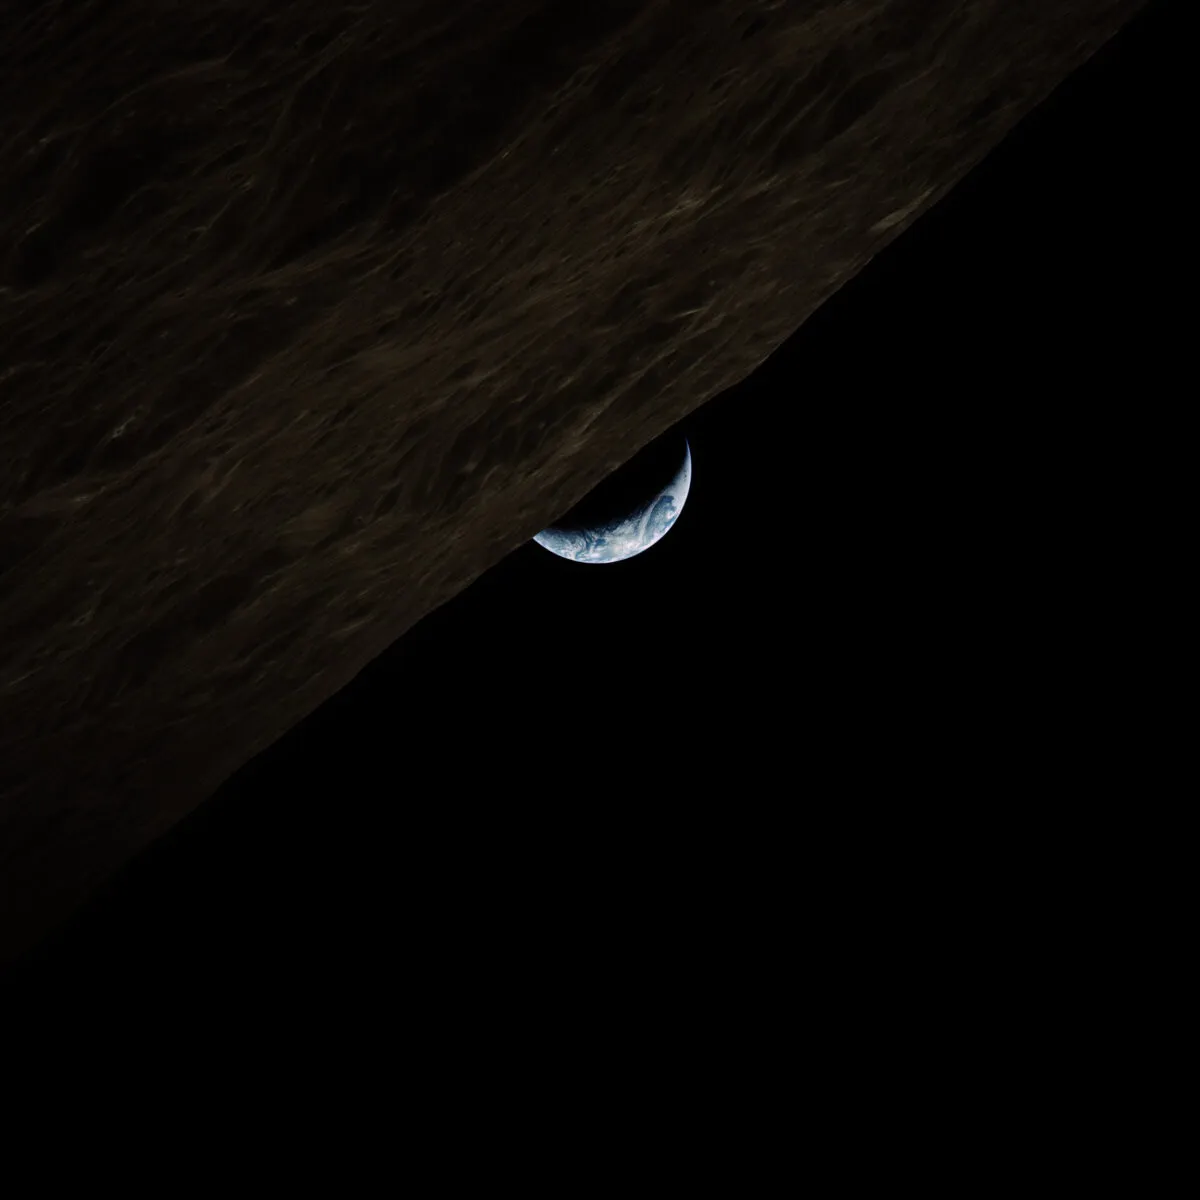 Apollo 17 was the last crewed mission to the Moon, or as astronaut Gene Cernan would have put it, the 'most recent' crewed mission to the Moon. This crescent earthrise was captured on 16 December 1972. Credit: NASA / restored by Toby Ord